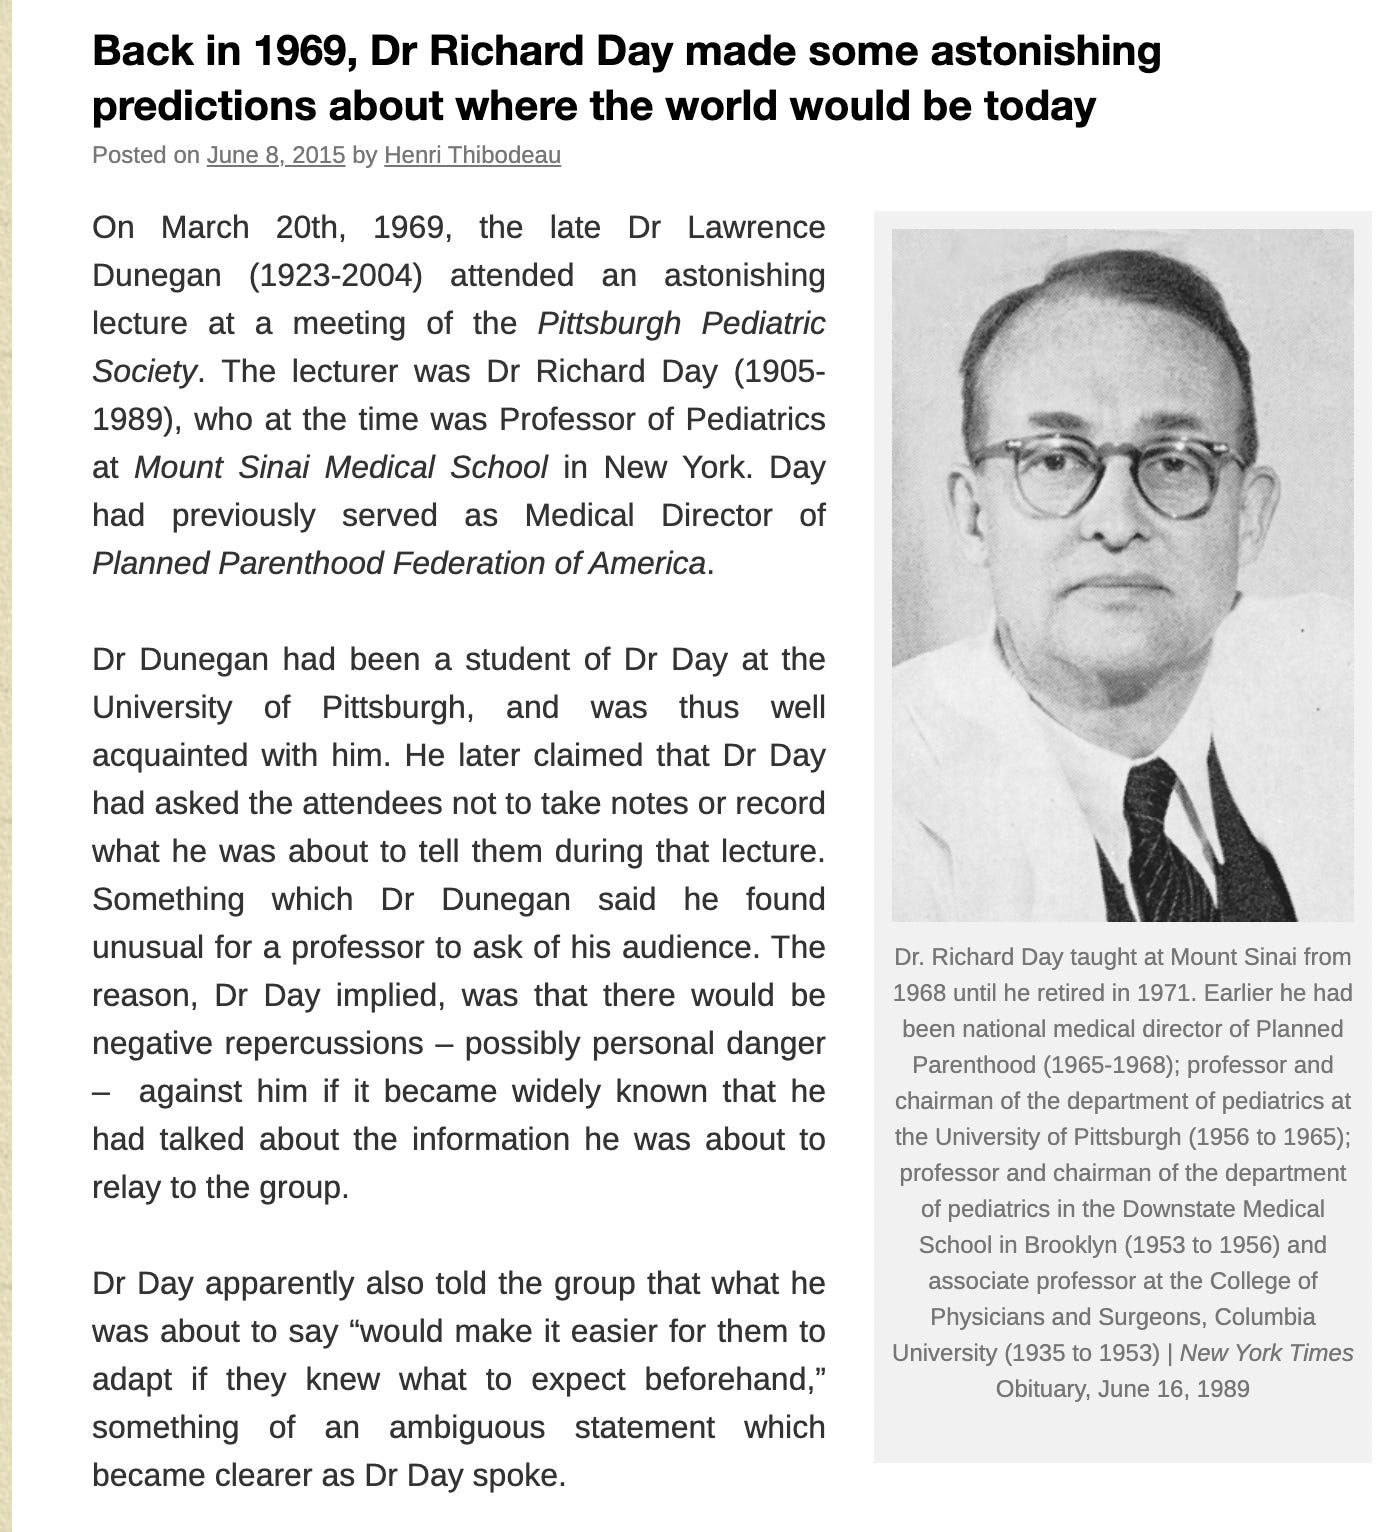 "If population growth didn't slow down, food shortages could be created in a hurry." In 1969, ex-Planned Parenthood Medical Director Richard Day Prophesied How the Globalist Agendas Would Unfold